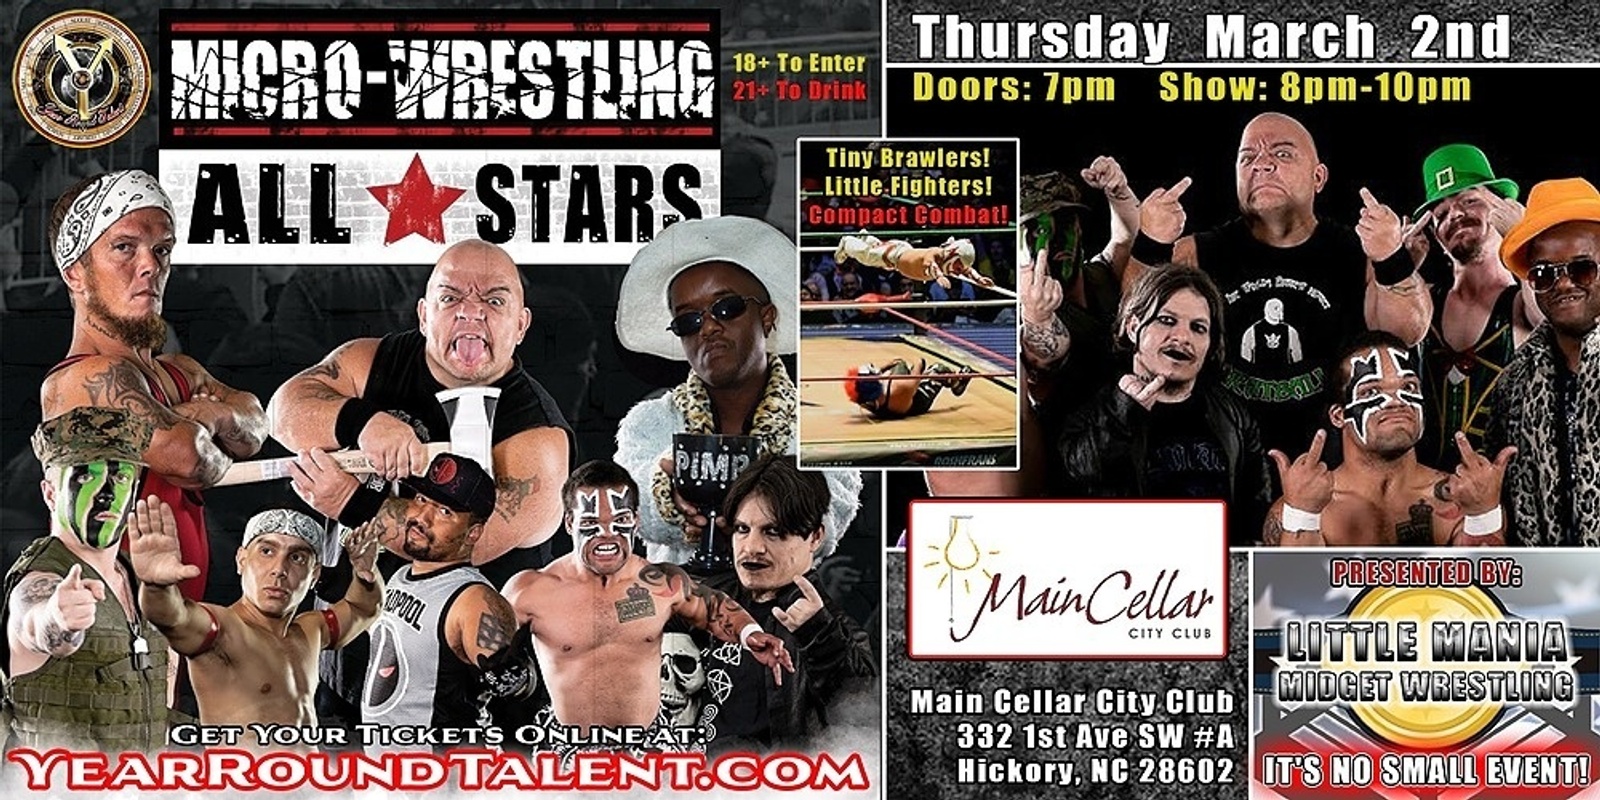 Banner image for Hickory, NC - Micro-Wresting All * Stars: Little Mania Rips Through the Ring!